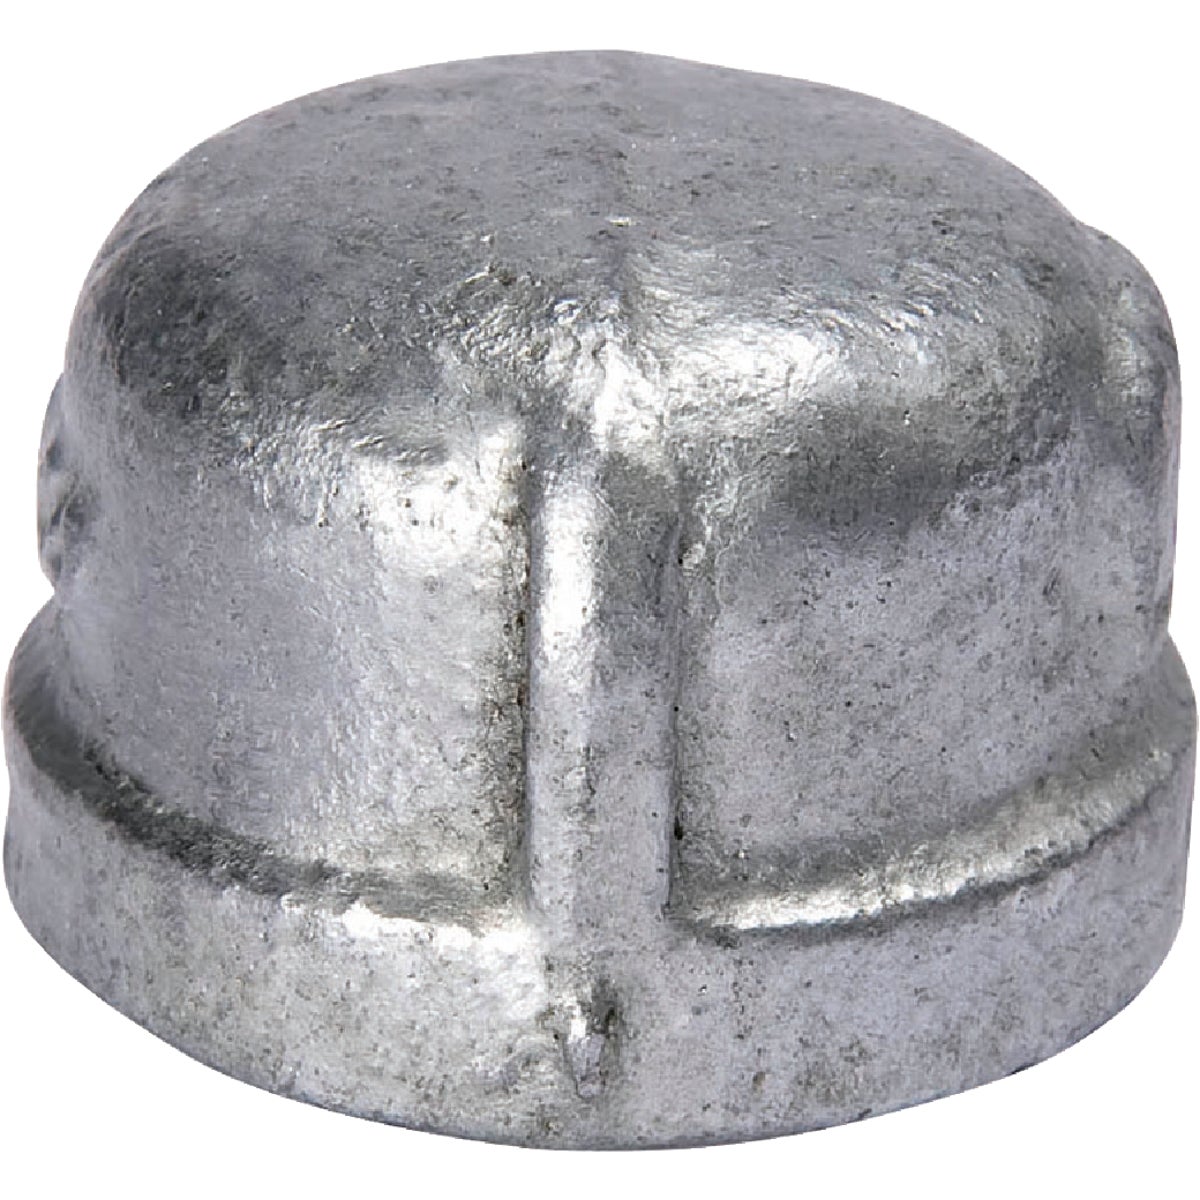 Item 422371, Galvanized malleable iron. Each fitting is individually flag tagged.